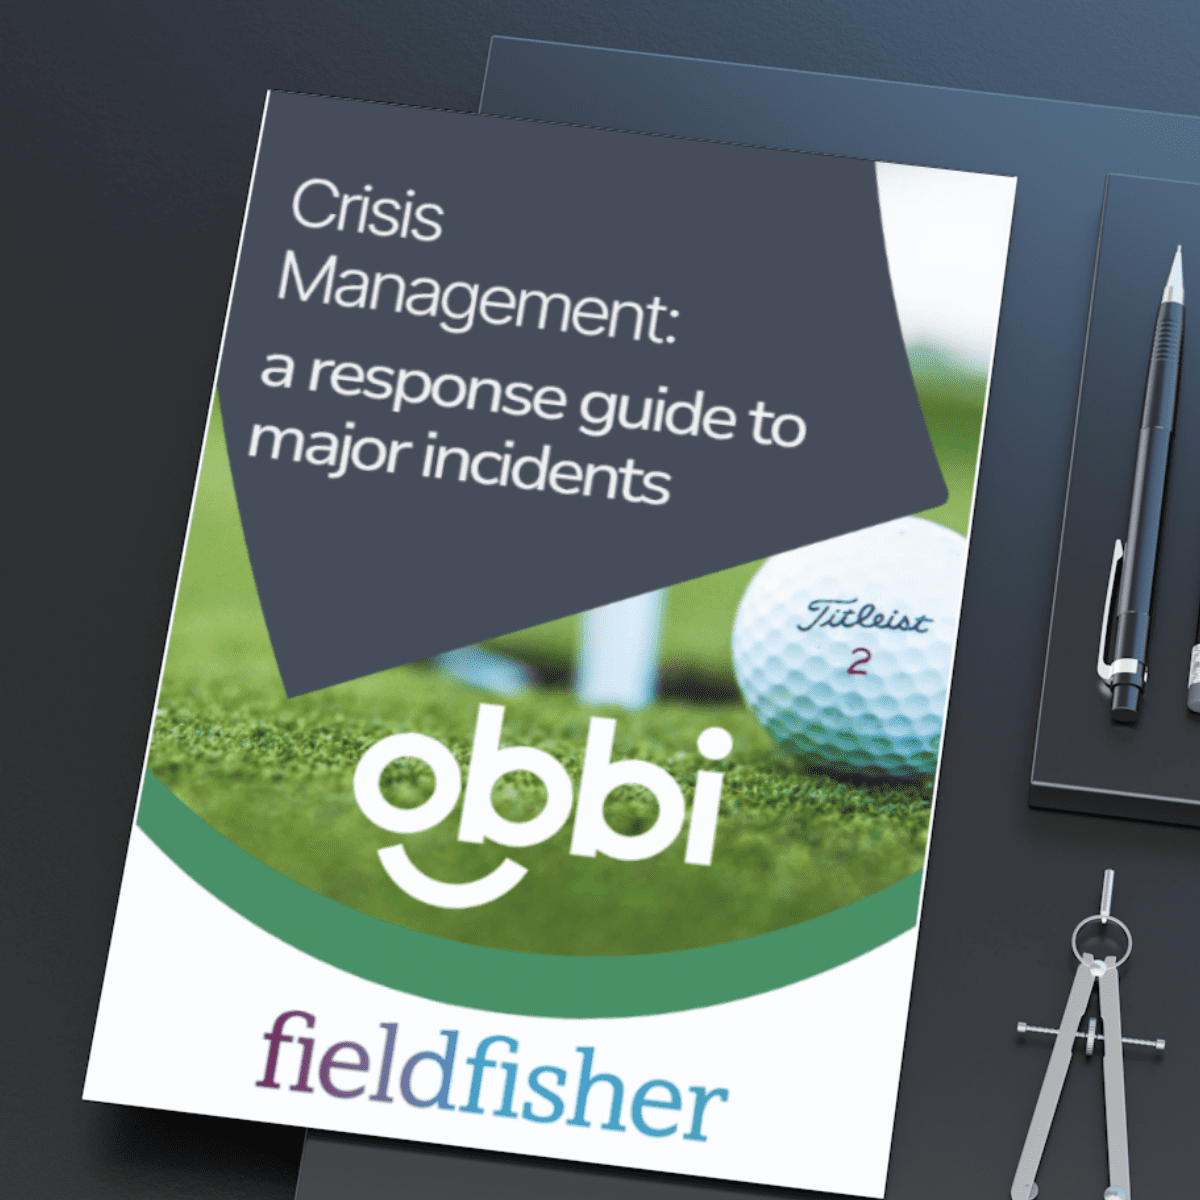 New eBook Release: “Club Crisis Management: A Response Guide to Major Incidents”